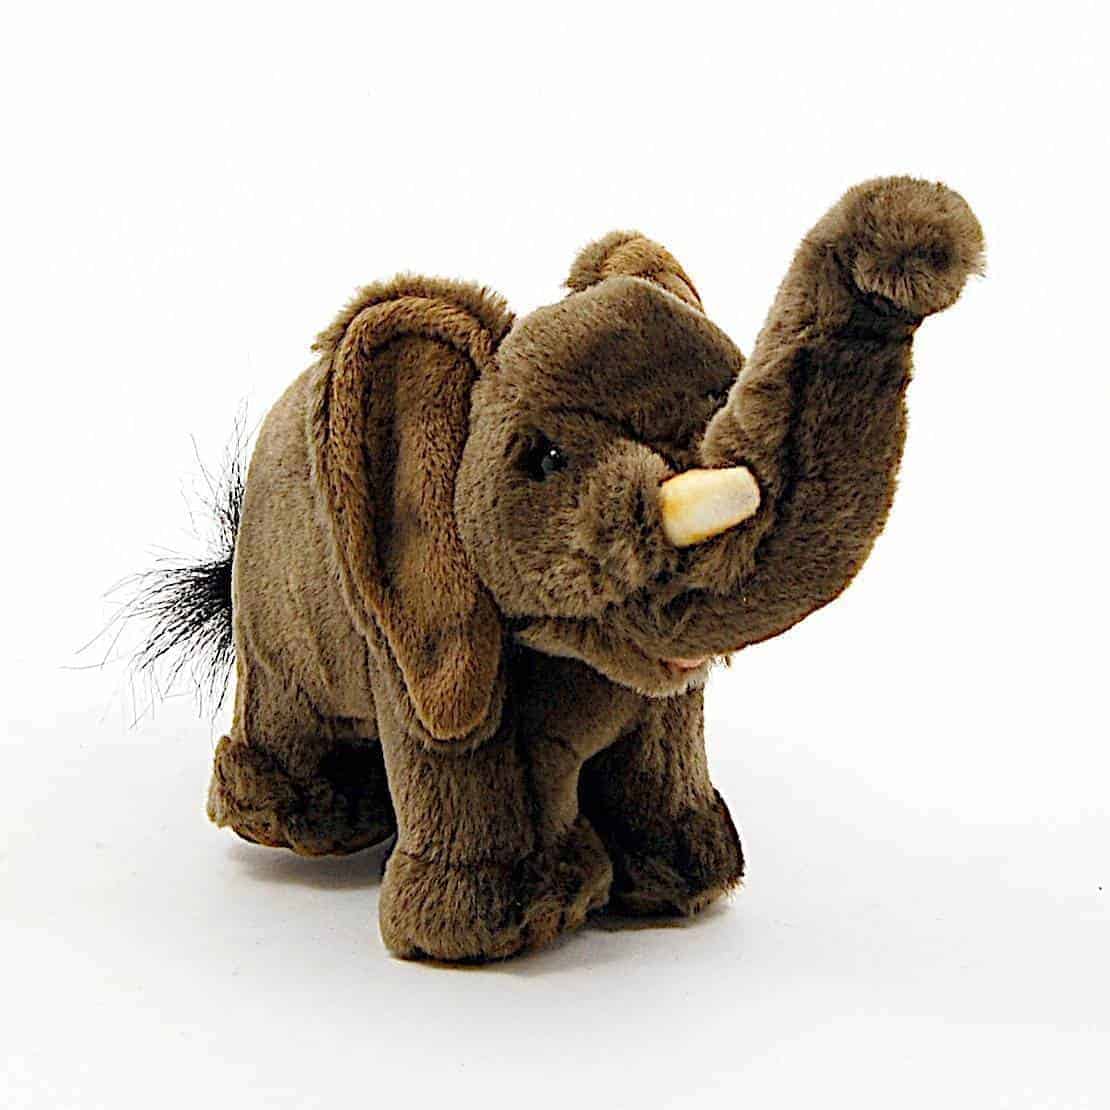 This Elephant Baby 9'' by Hansa True to Life Look Soft Plush Animal Learning Toys is made with love by Premier Homegoods! Shop more unique gift ideas today with Spots Initiatives, the best way to support creators.